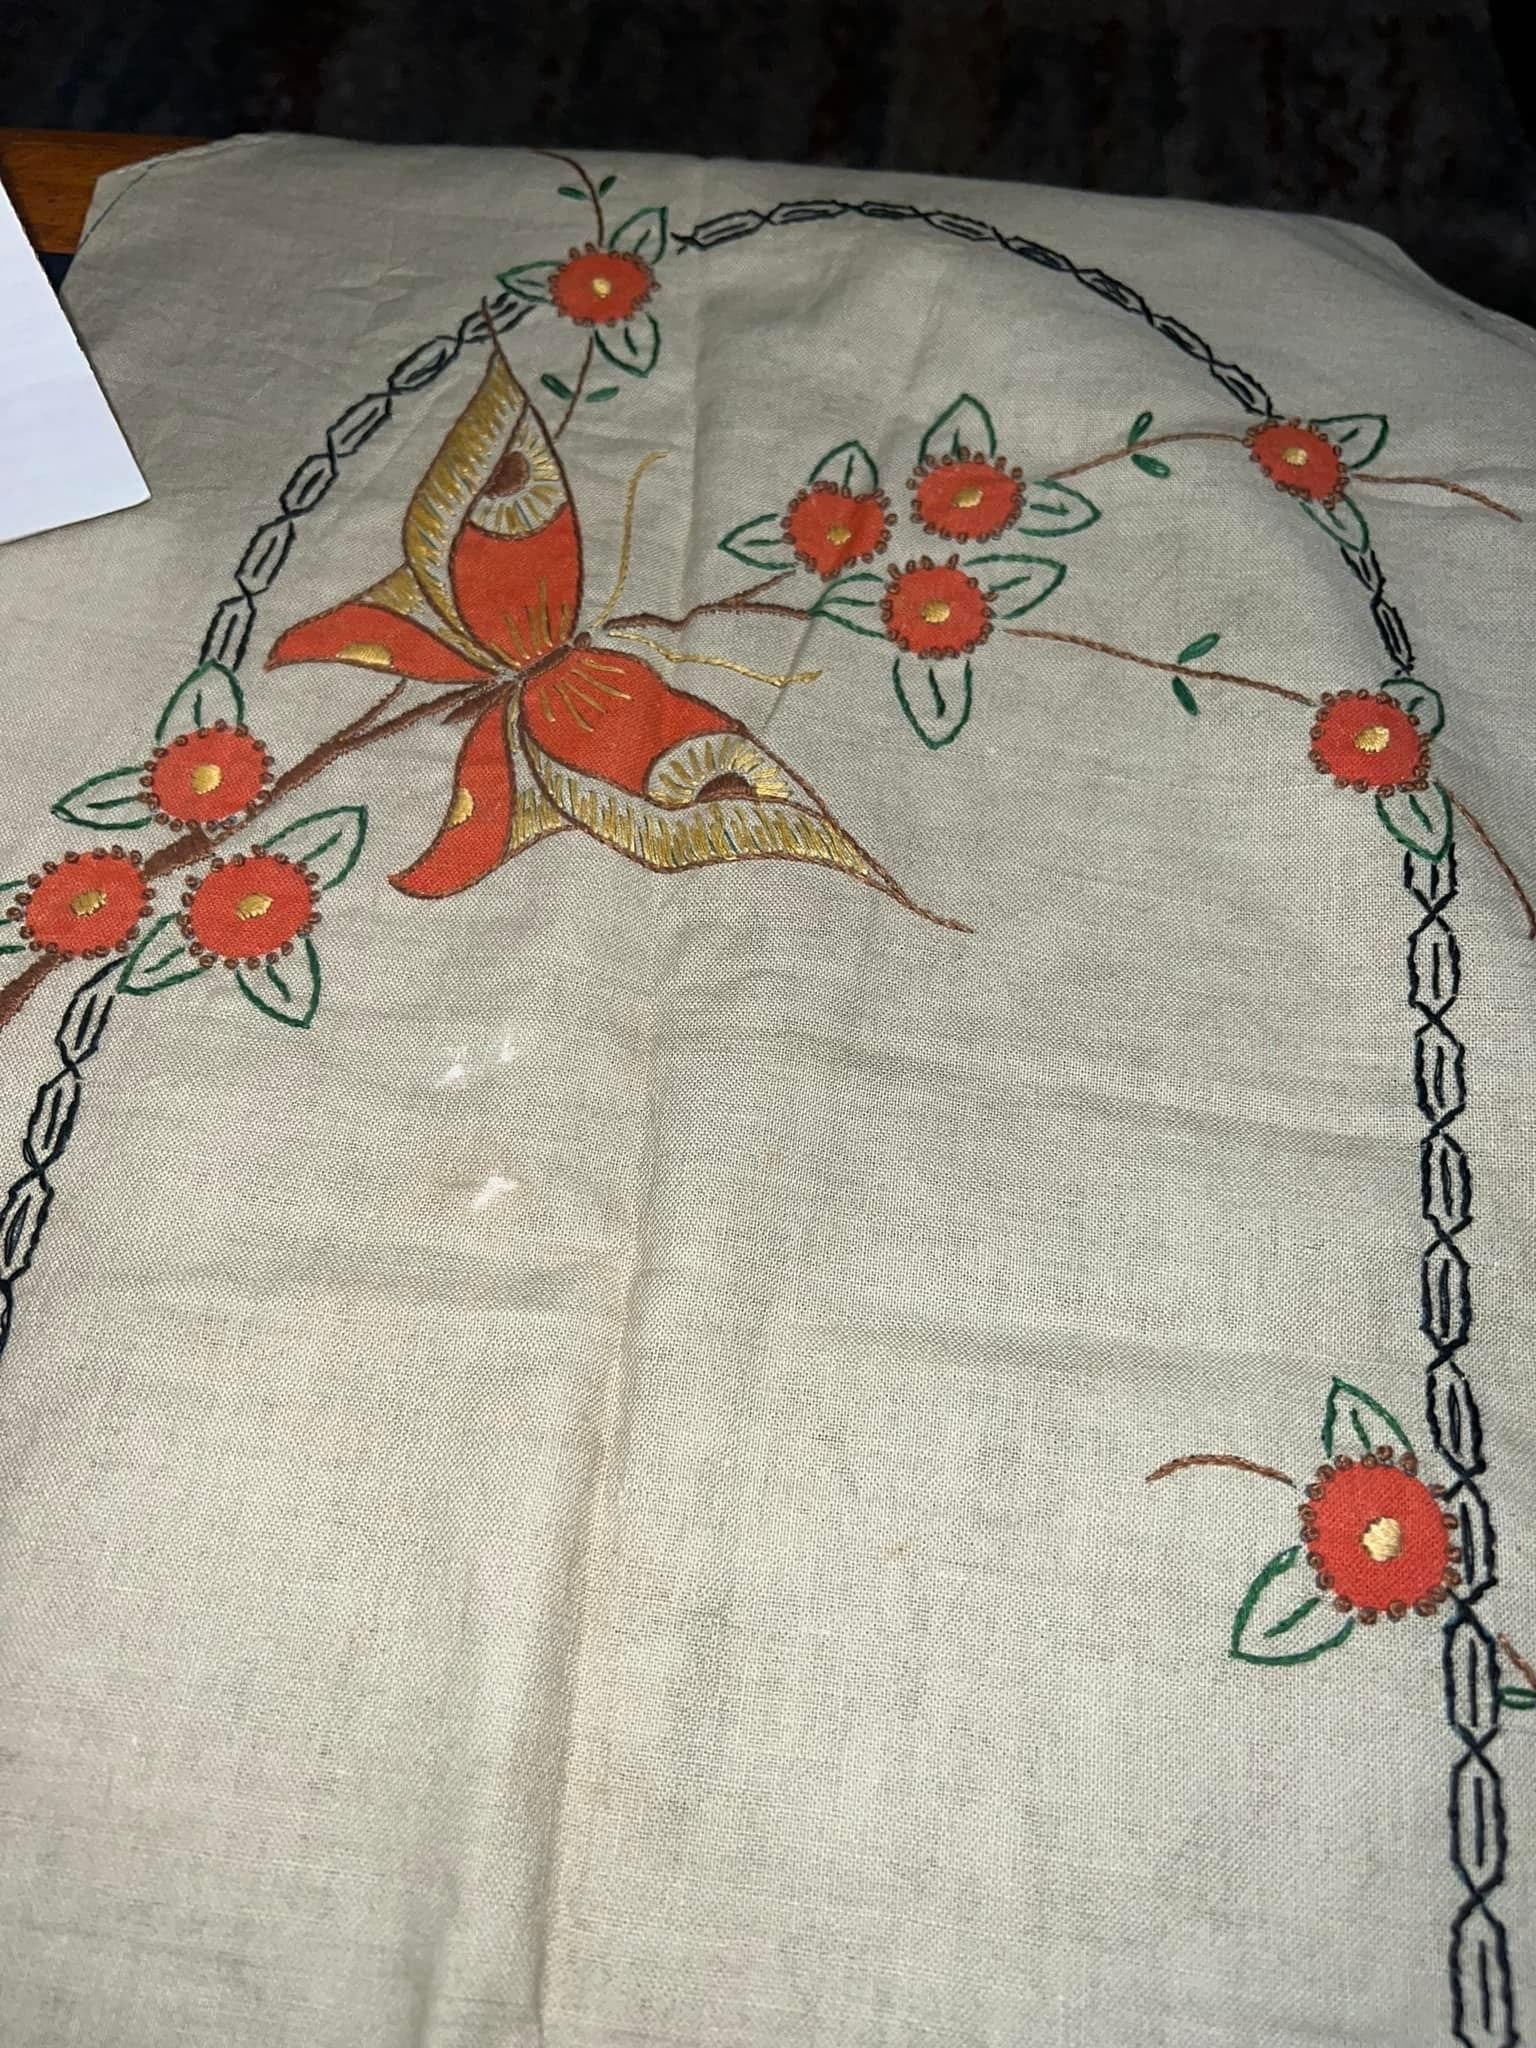 Antique Early pattern table runner 1920-1930s Butterfly’s & flowers vintage textile